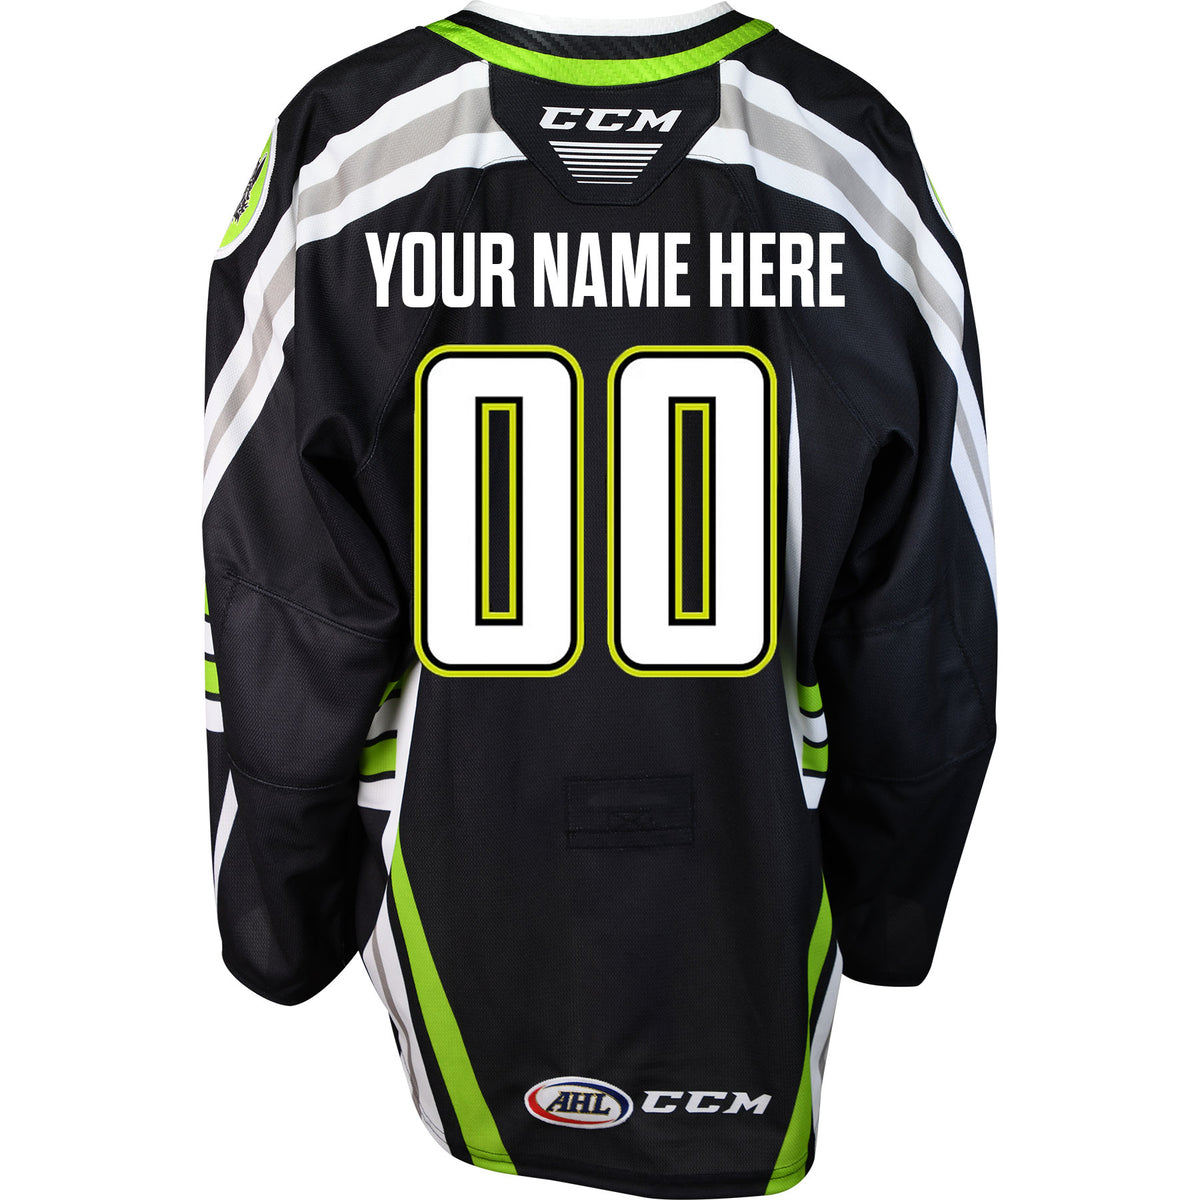 CCM Youth Quicklite White Jersey